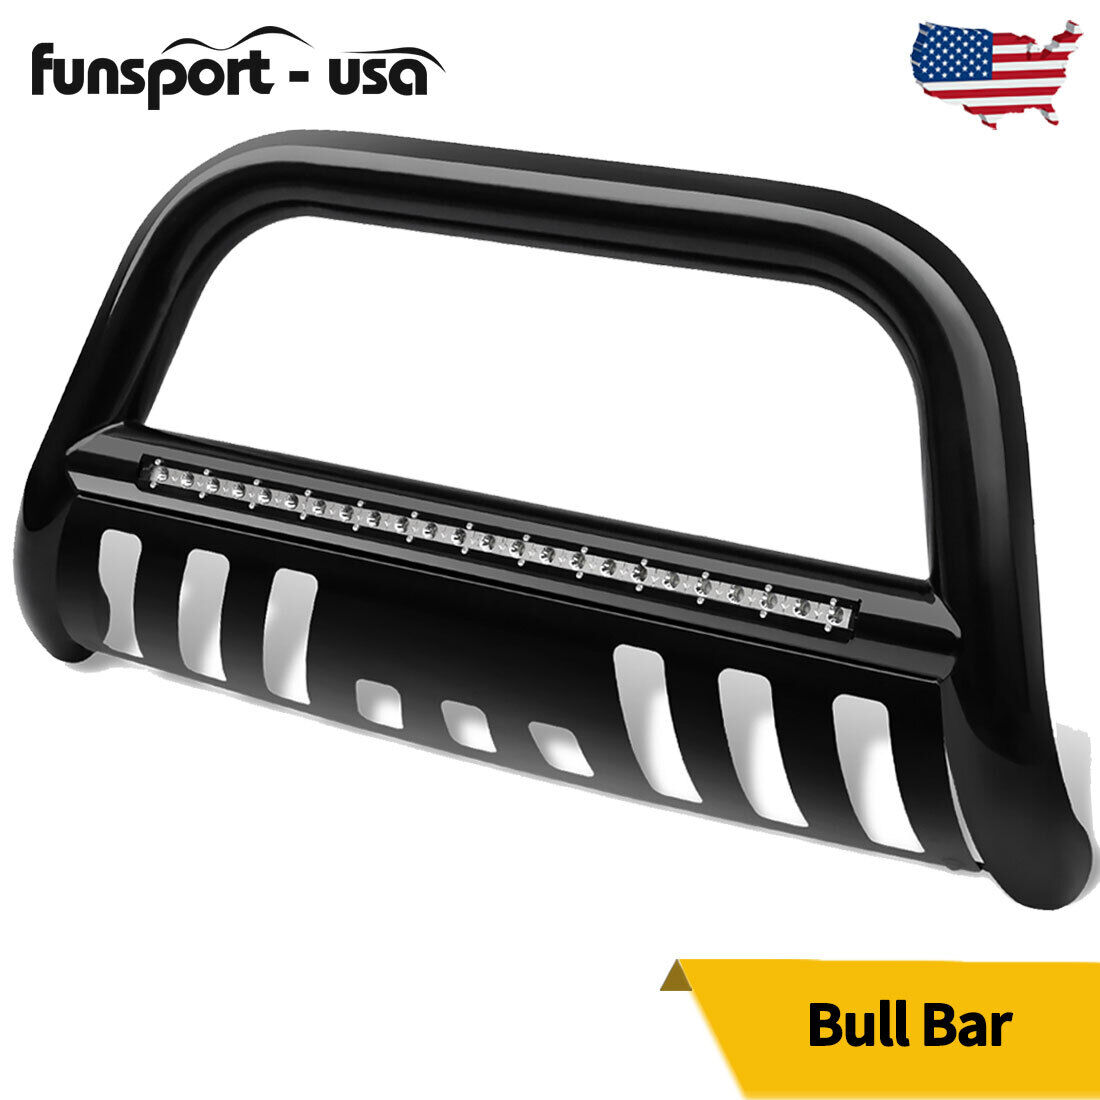 Bull Bar Bumper Grille Guard for 2005-2021 Nissan Frontier with LED Light Bar